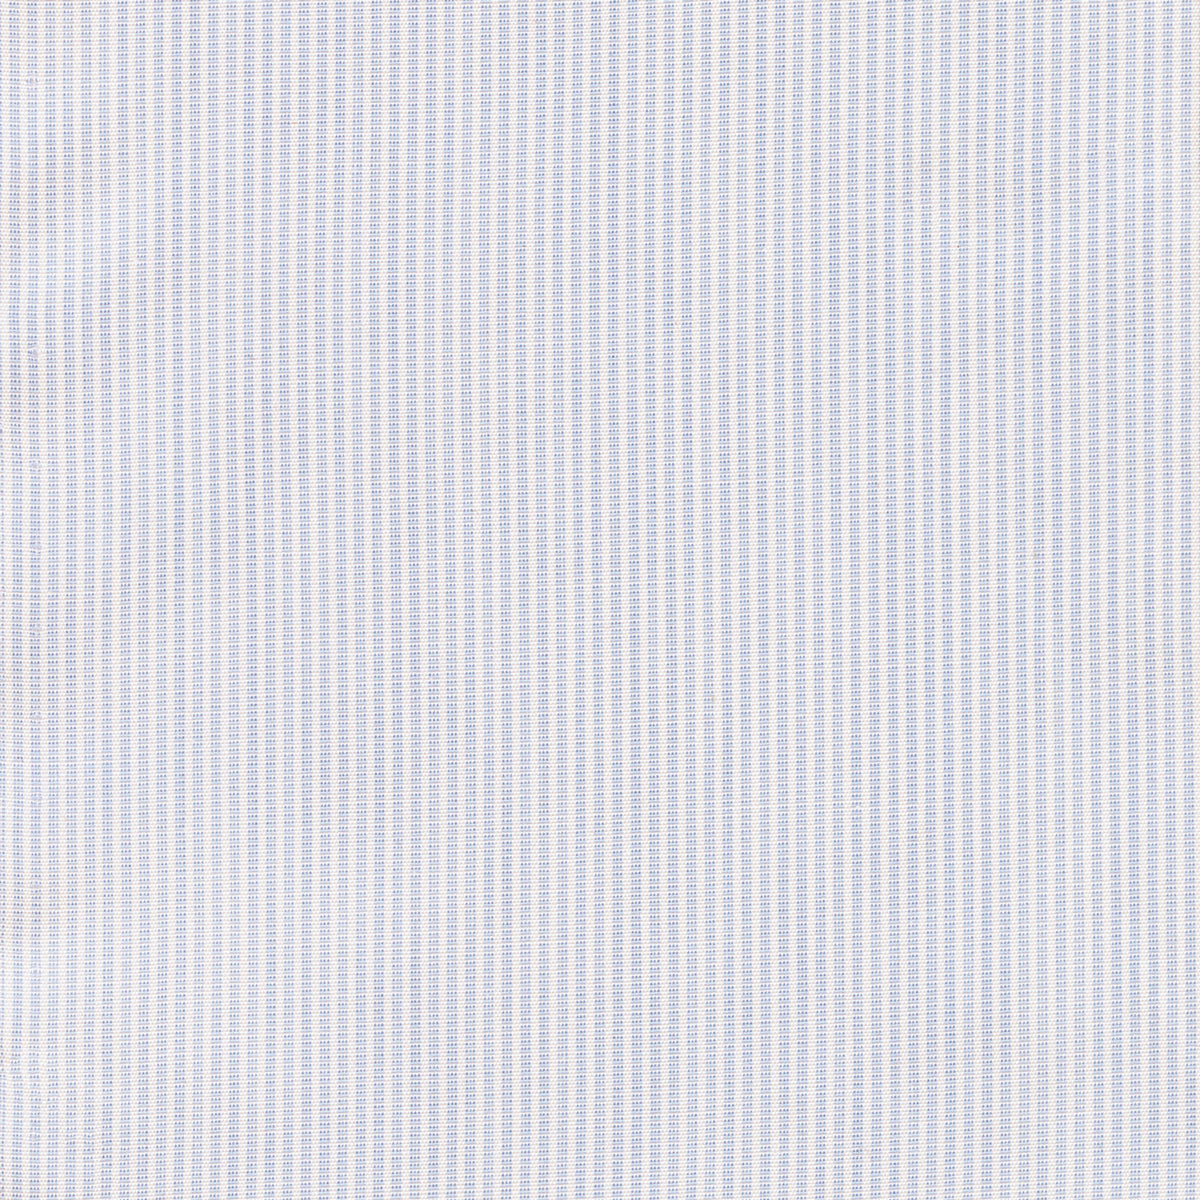 Made-to-Measure Shirt in Pale Blue/White Stripe End-on-End